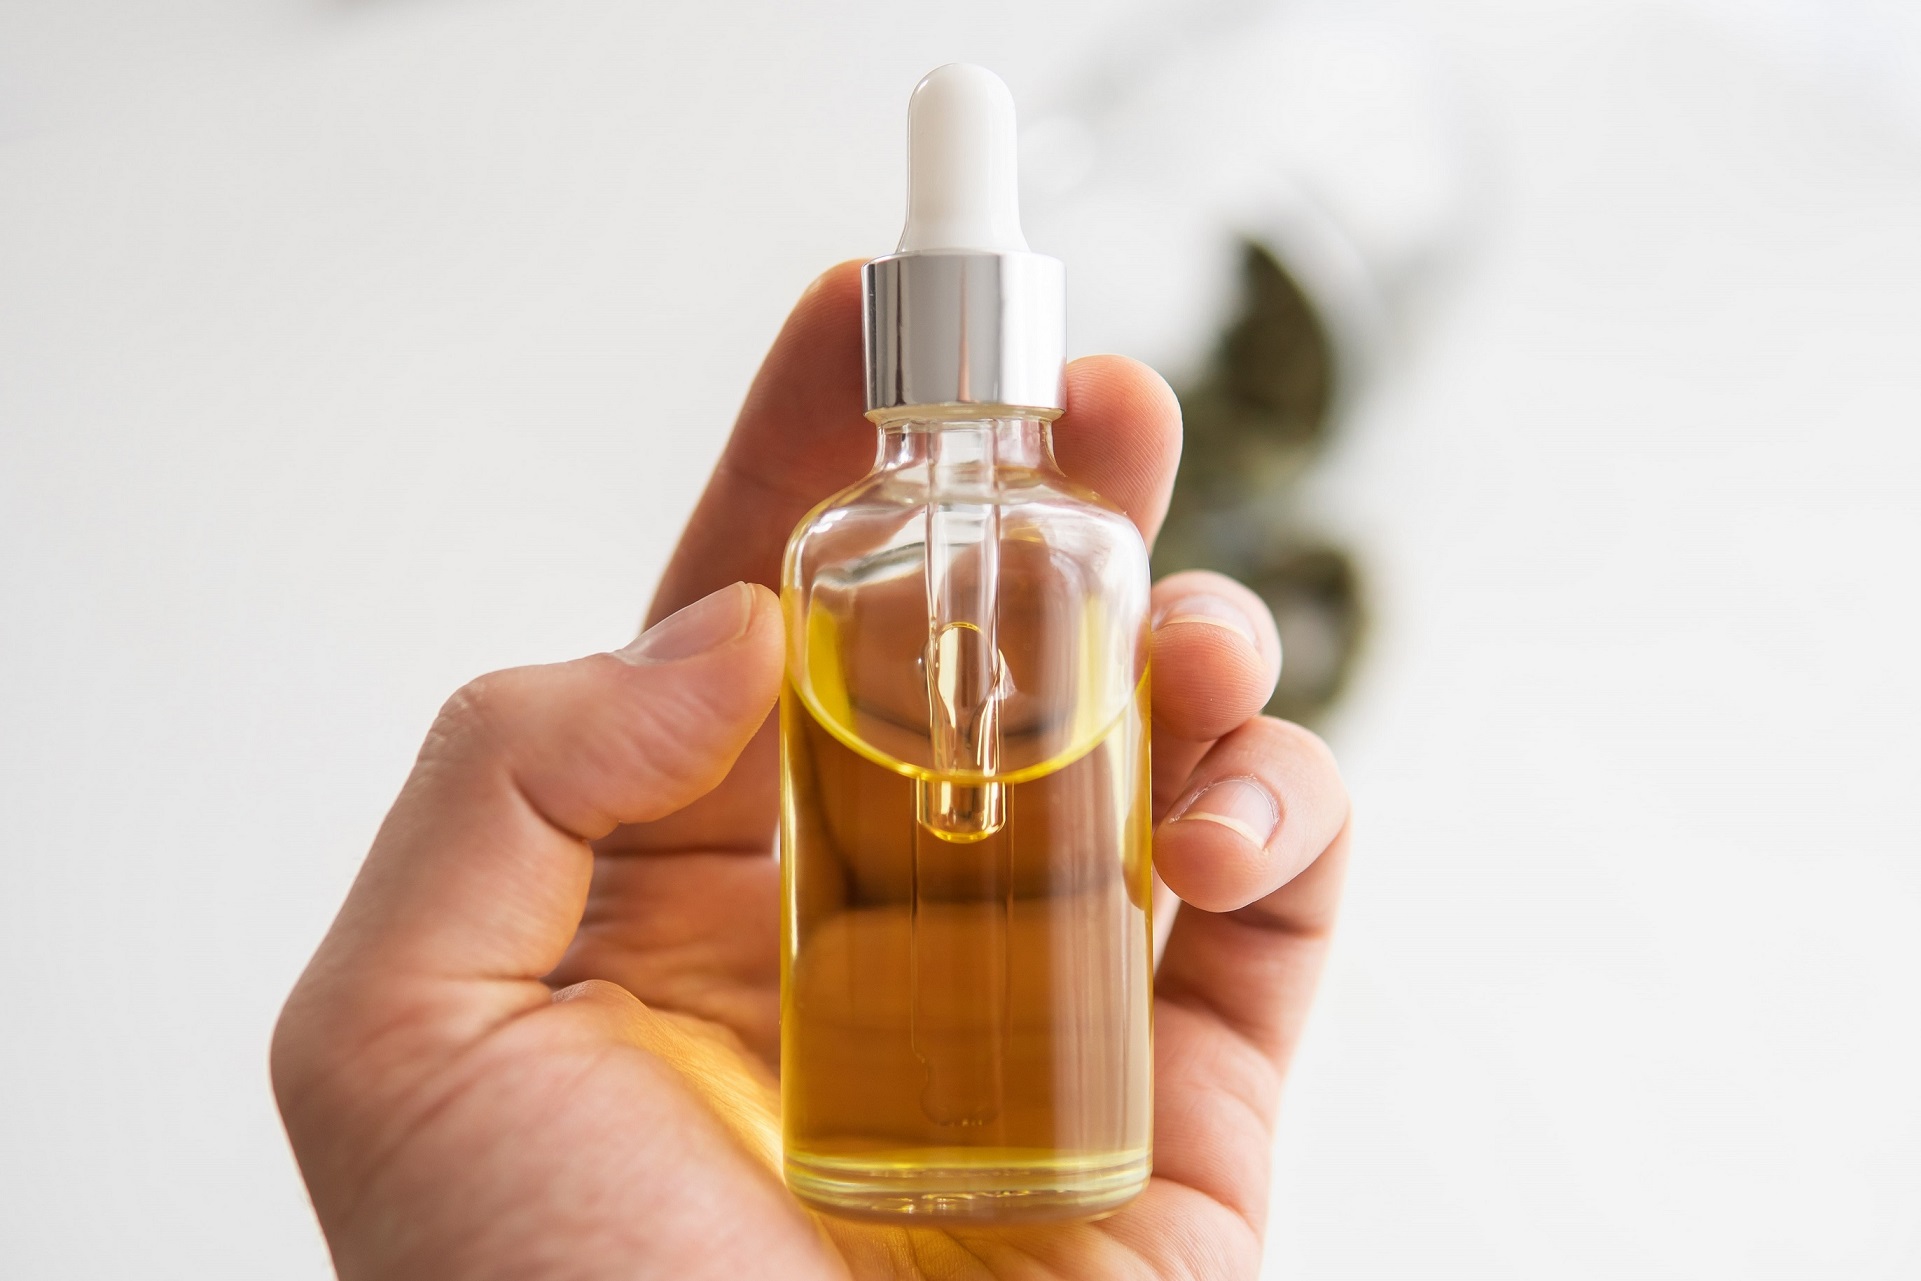 Is There THC In CBD Oil?